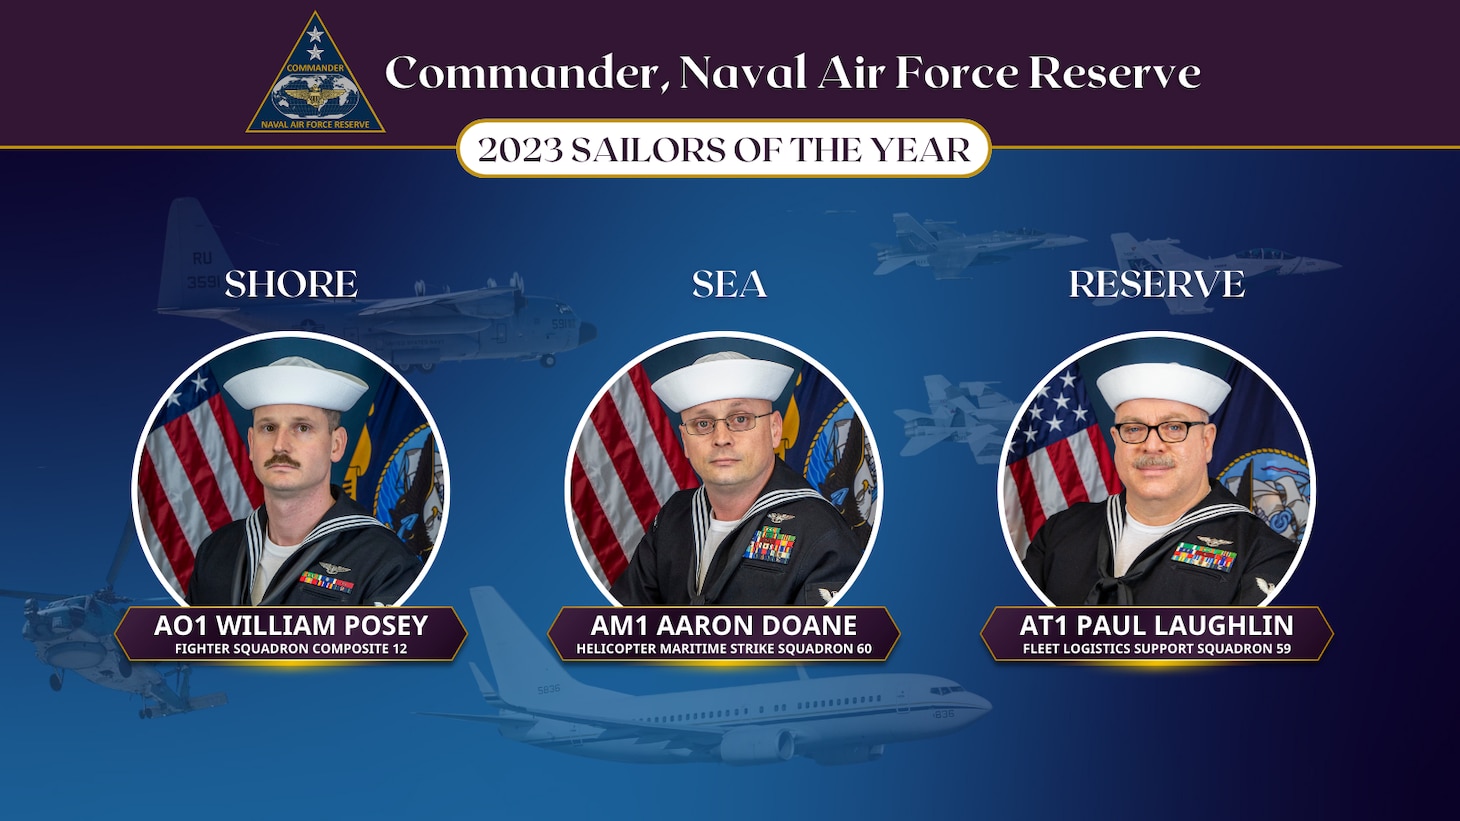 CNAFR FY 23 Sailors of the Year Graphic